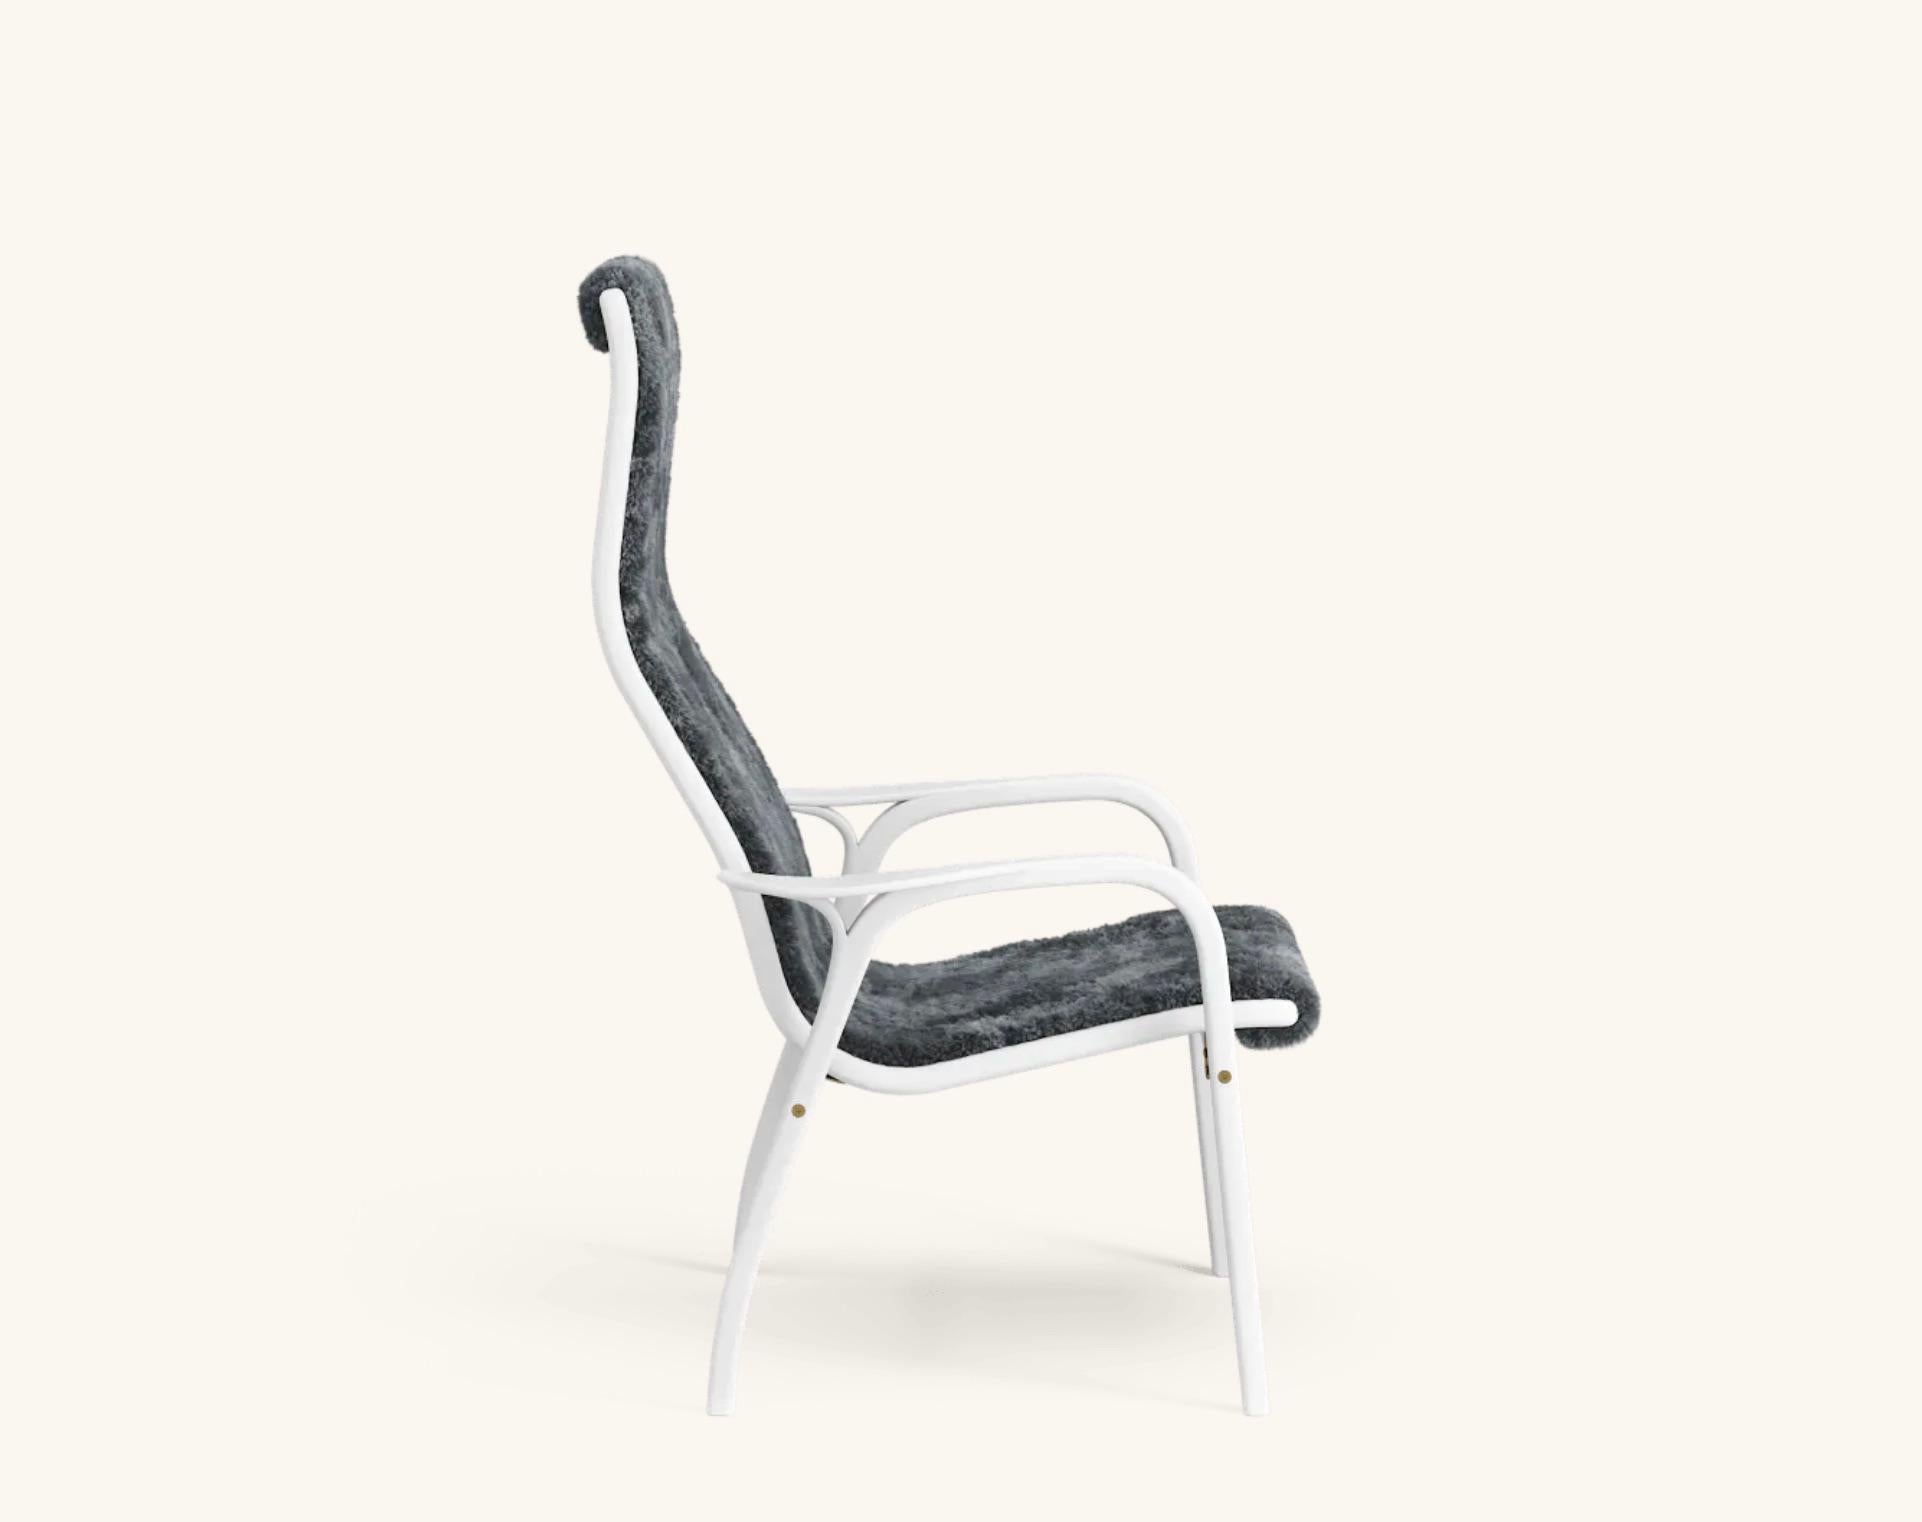 Yngve Ekström Lamino easy chair by Swedese in laminated white ash and sheepskin 'Charcoal'.

The Lamino by Yngve Ekström is one of the most iconic Scandinavian easy chairs. Designed in 1956, this chair has never gotten out of style. Due to the